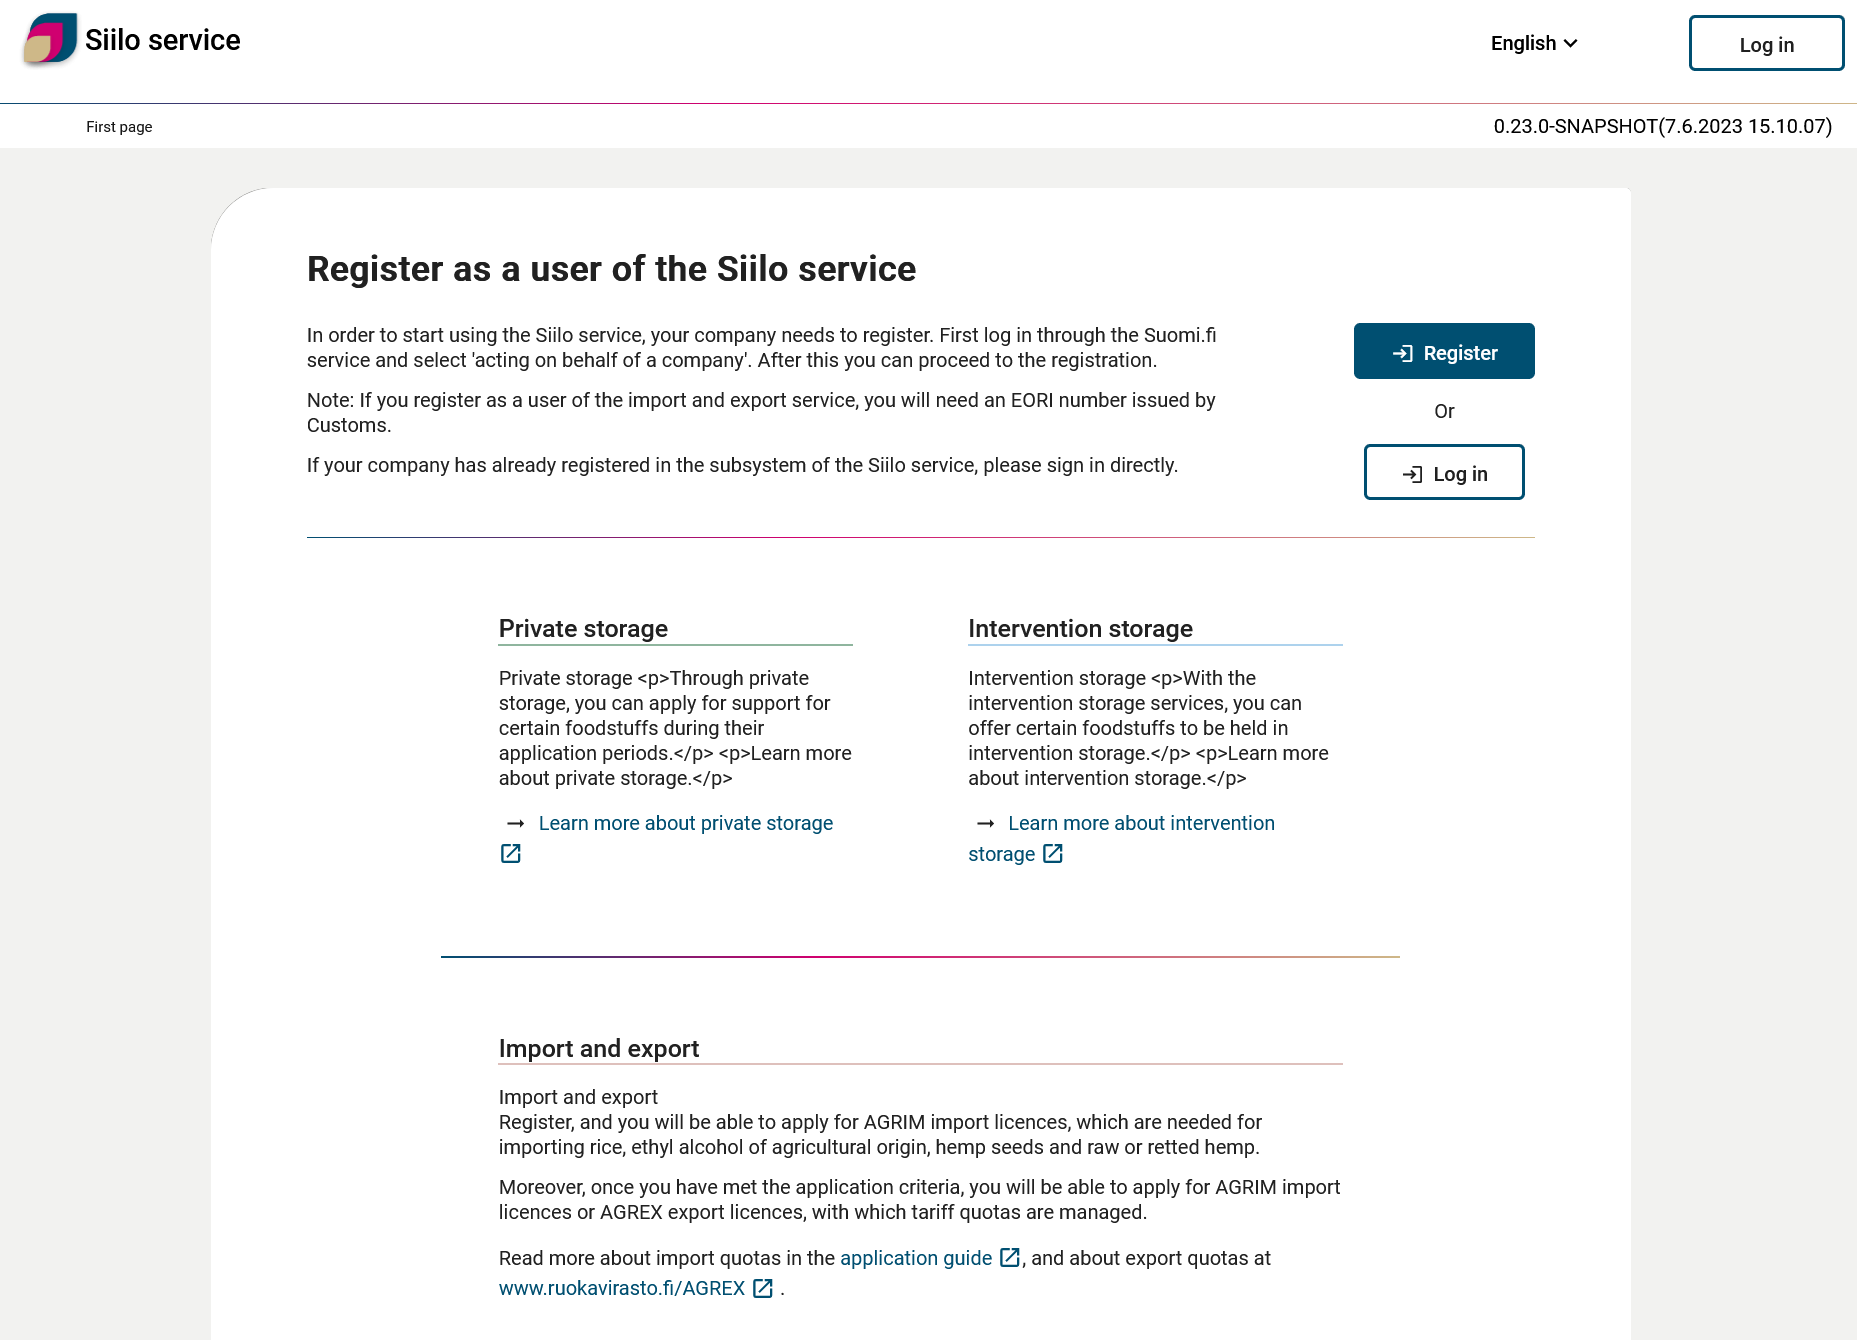 Screeshot 1 Registering into Siilo Service.png